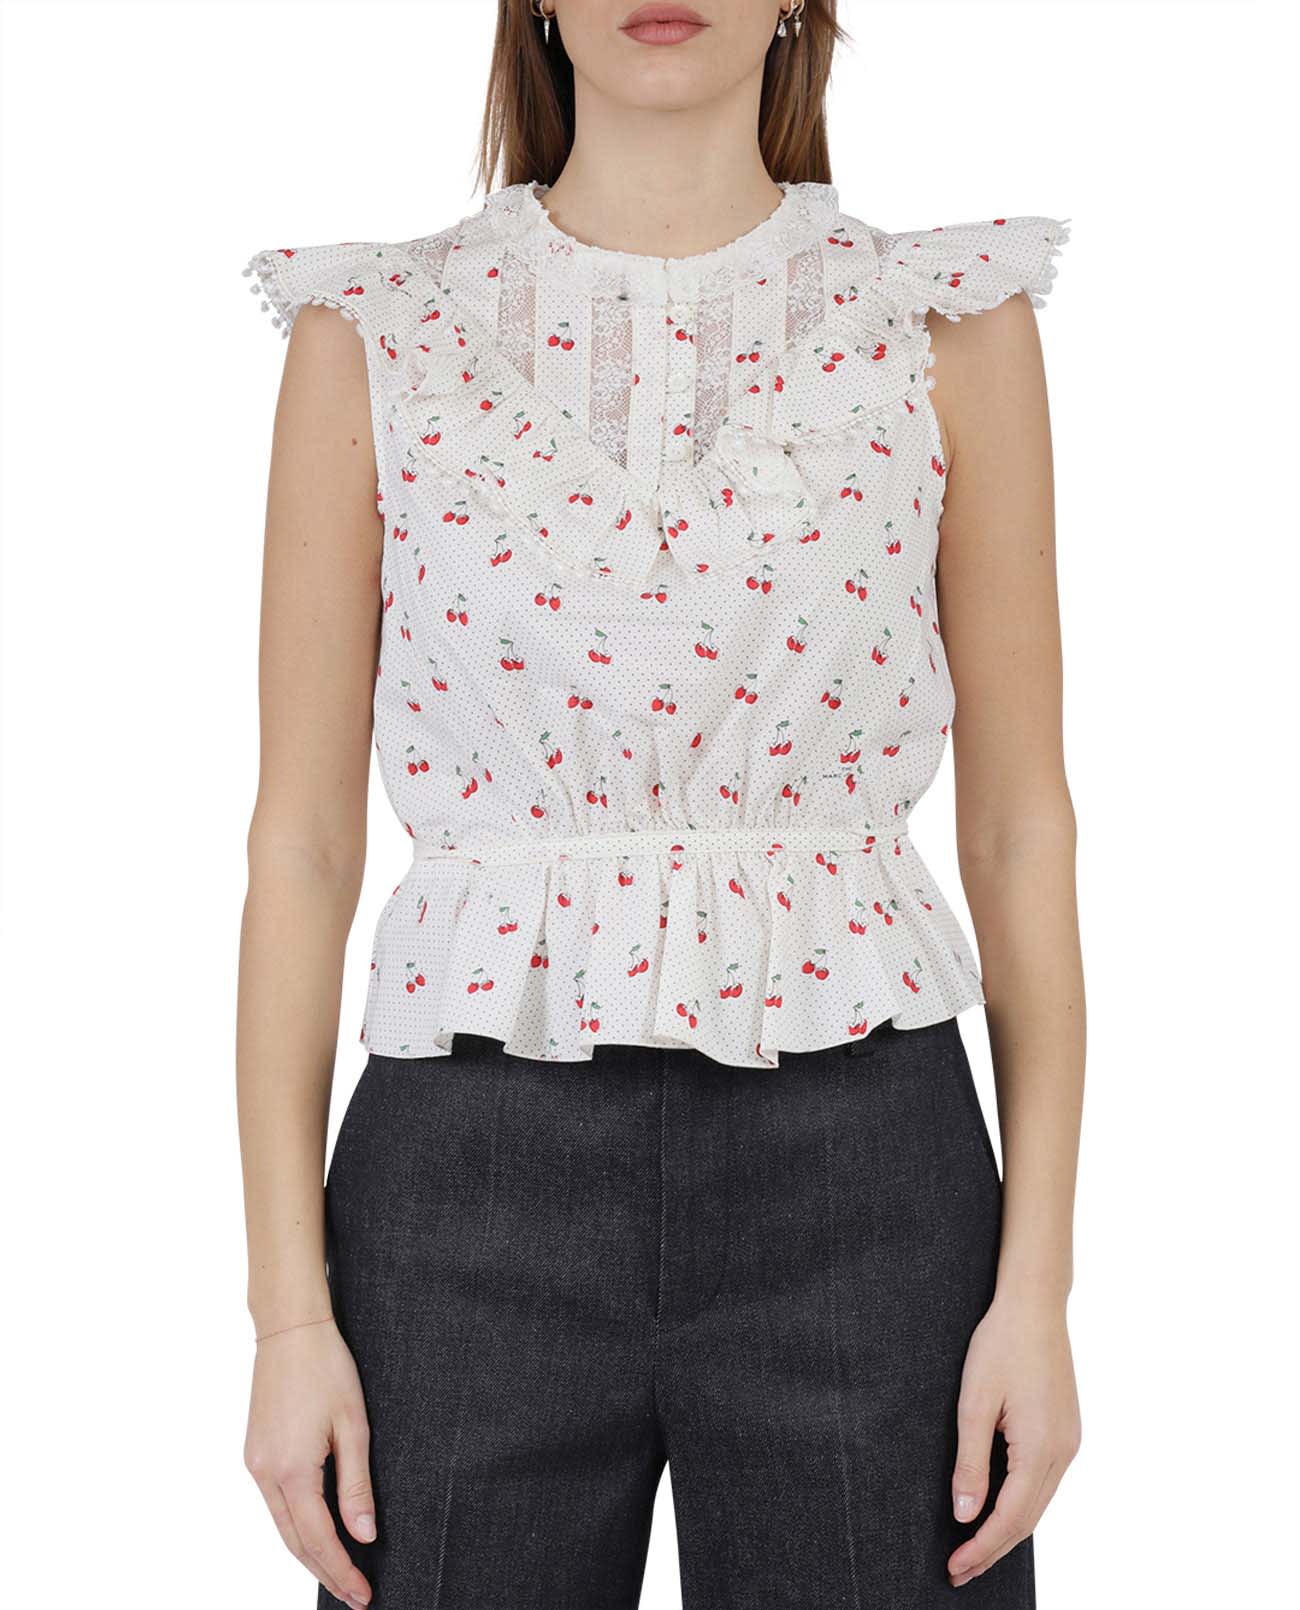 The Marc Jacobs Ivory Cherry Victorian Top